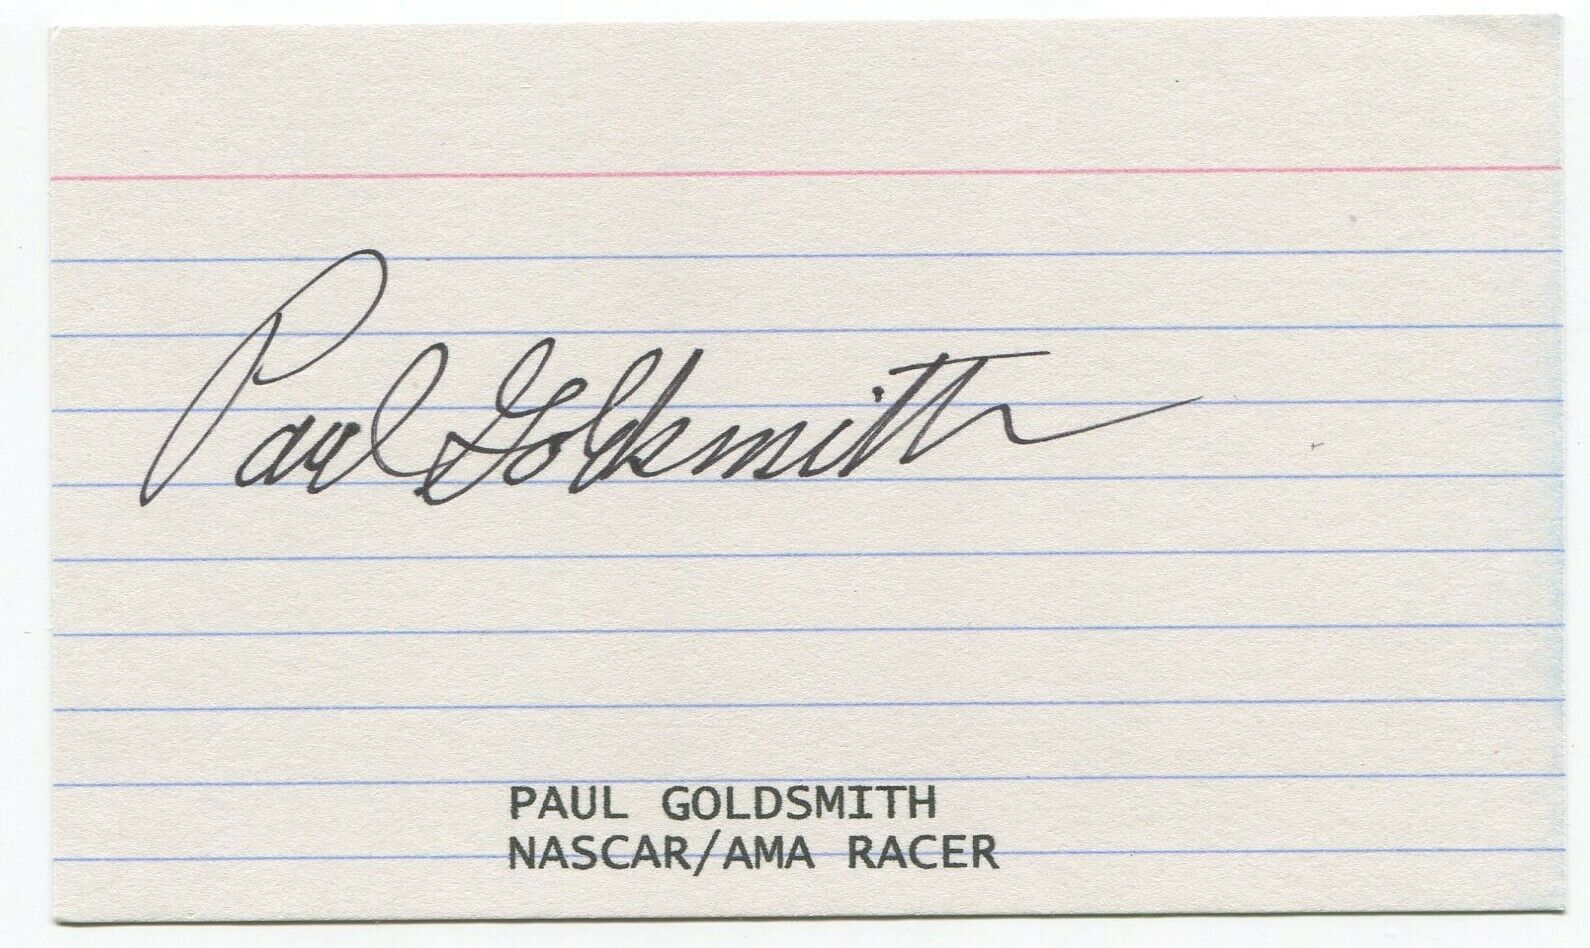 Paul Goldsmith Signed 3x5 Index Card Autographed Signature Nascar Race Driving